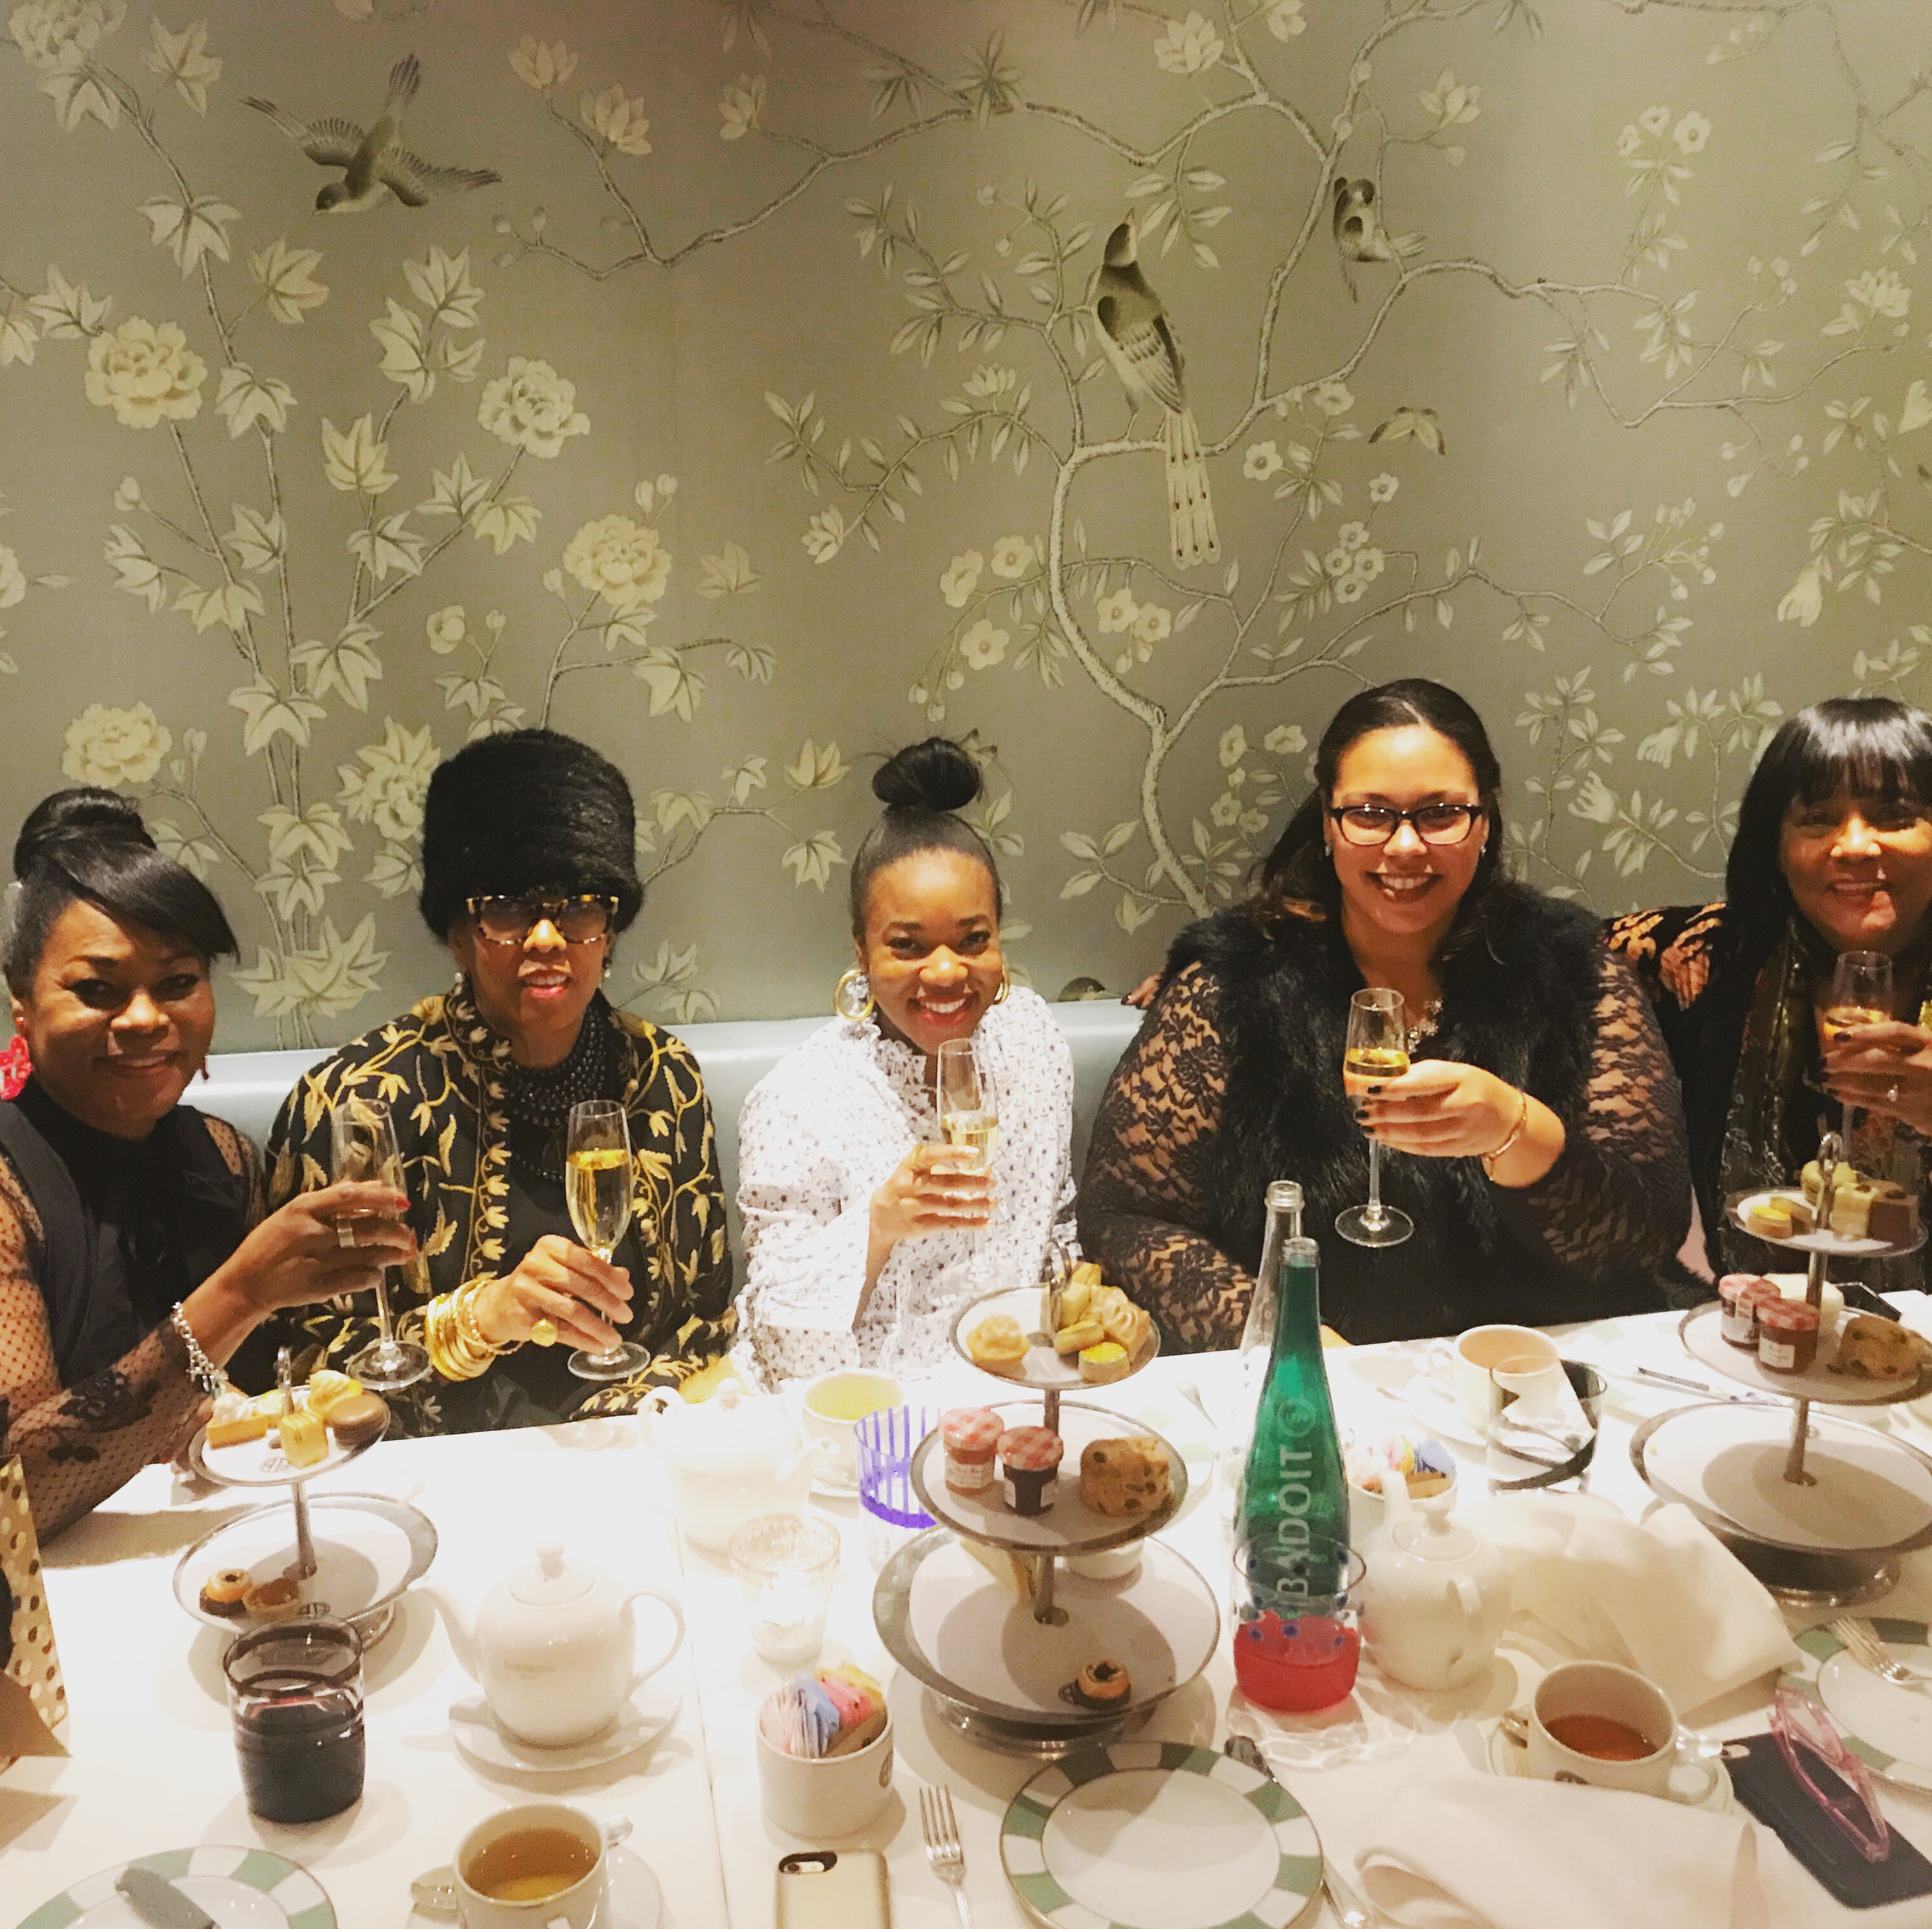 Ladies lunching; Afternoon Tea at Bergdorf Goodman; Millennials and Boomers